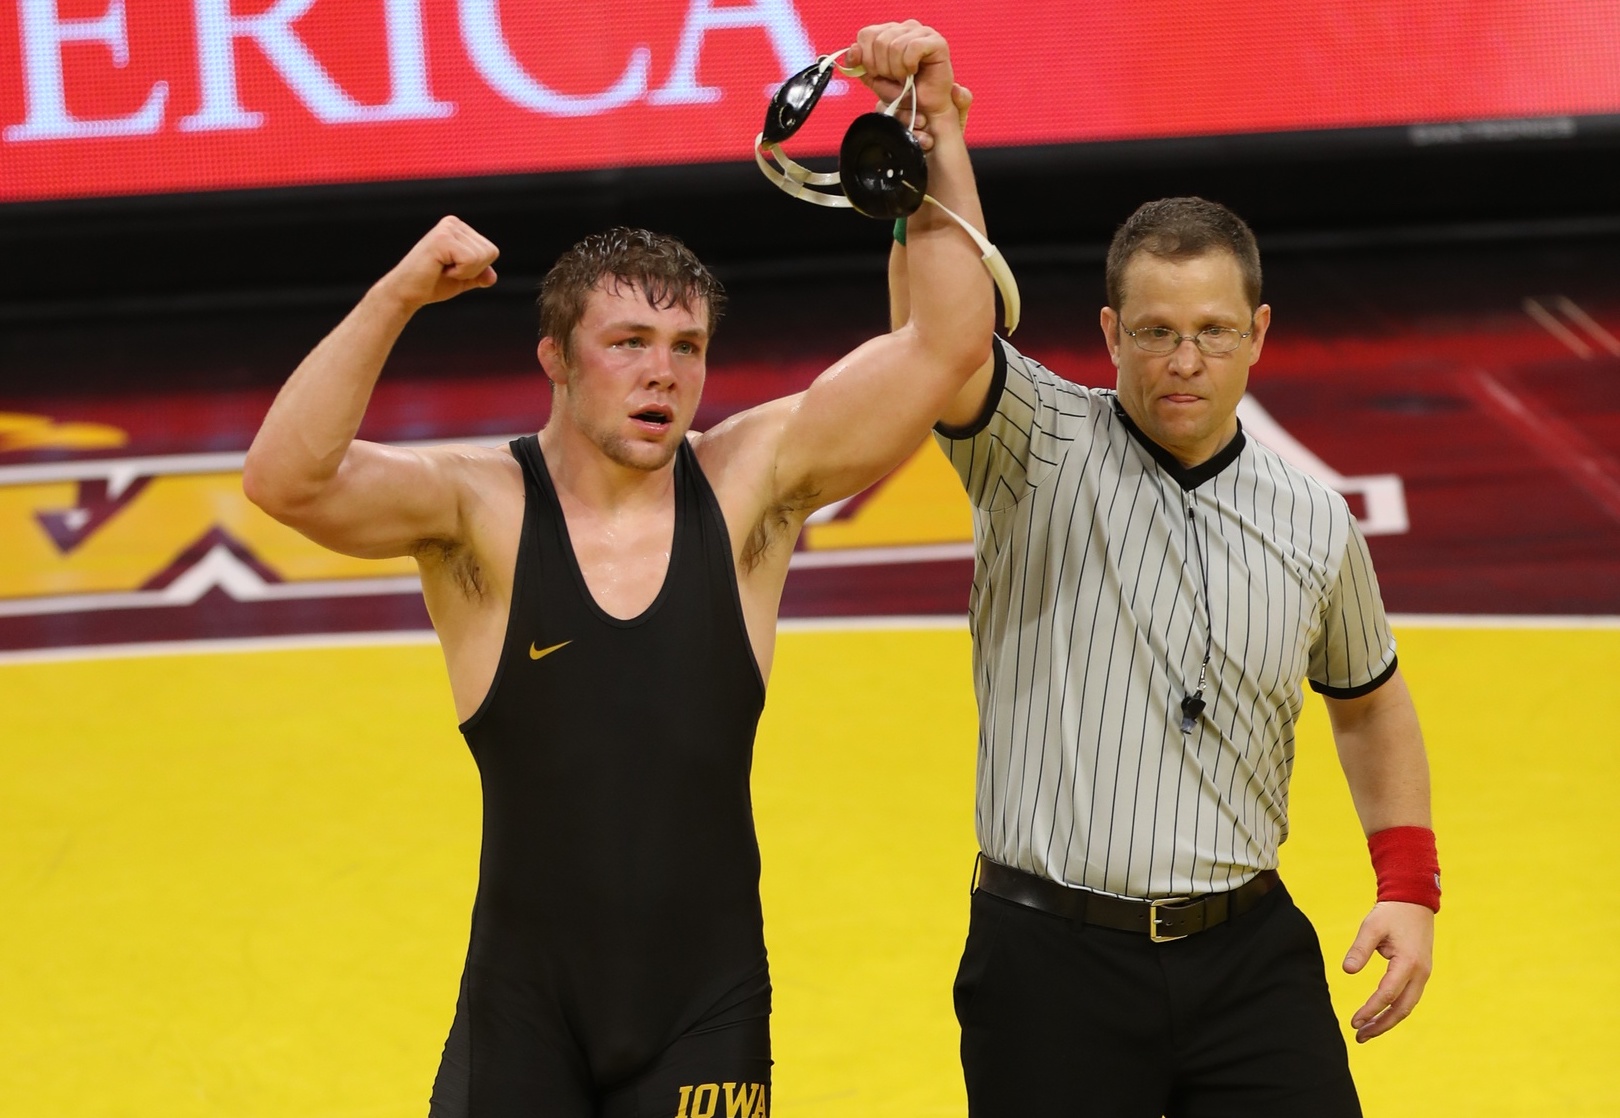 Iowa's Wrestling Lineup Could Be More Powerful Sports Illustrated